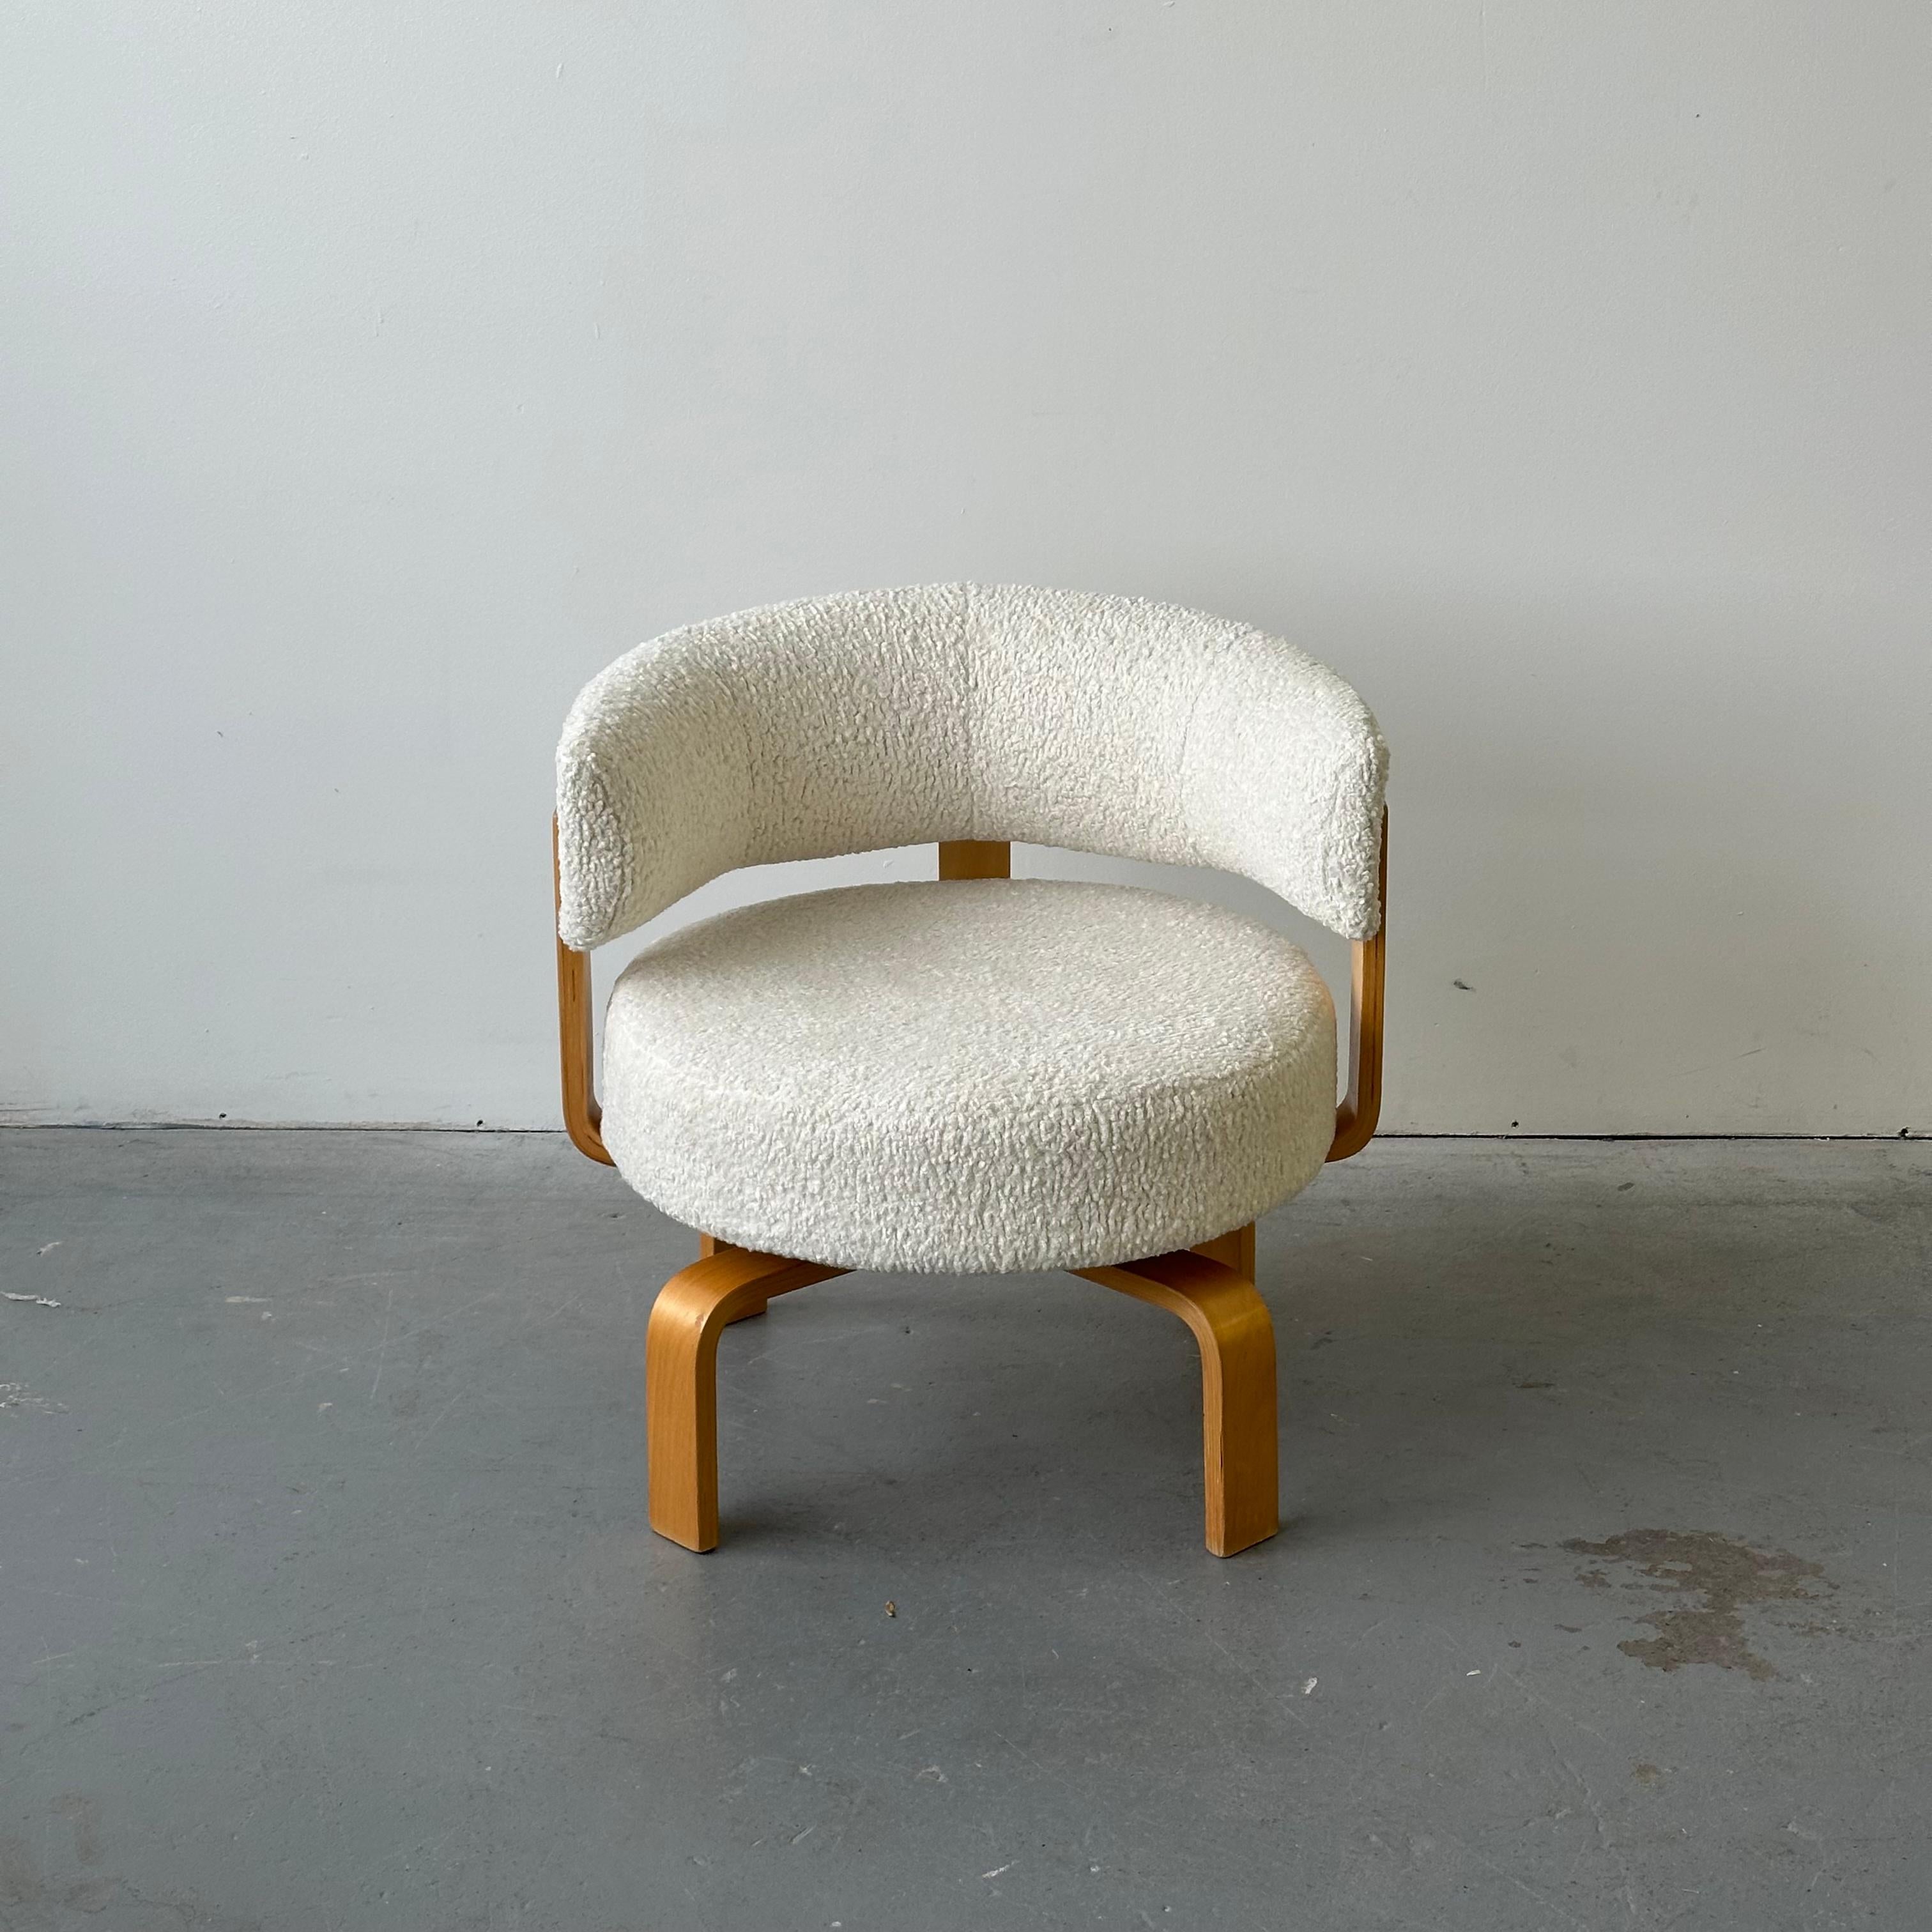 360 degree swivel armchair designed by Carina Bengs for Ikea, 2004. Great vintage condition. Professionally reupholstered in 